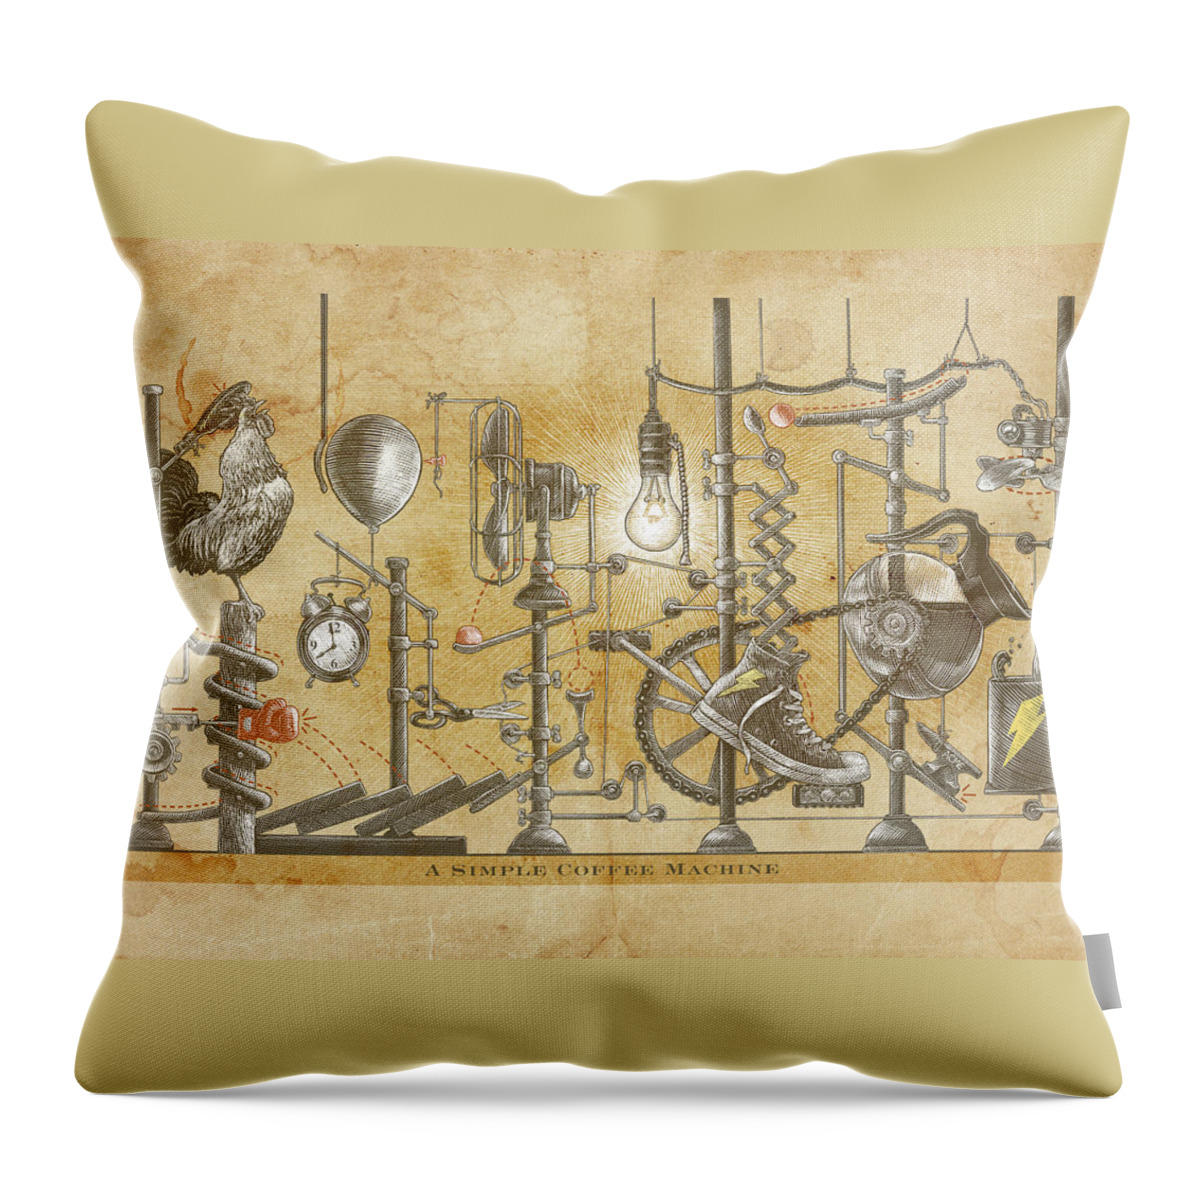 Color Scratchboard Throw Pillow featuring the drawing A Simple Coffee Machine by Clint Hansen